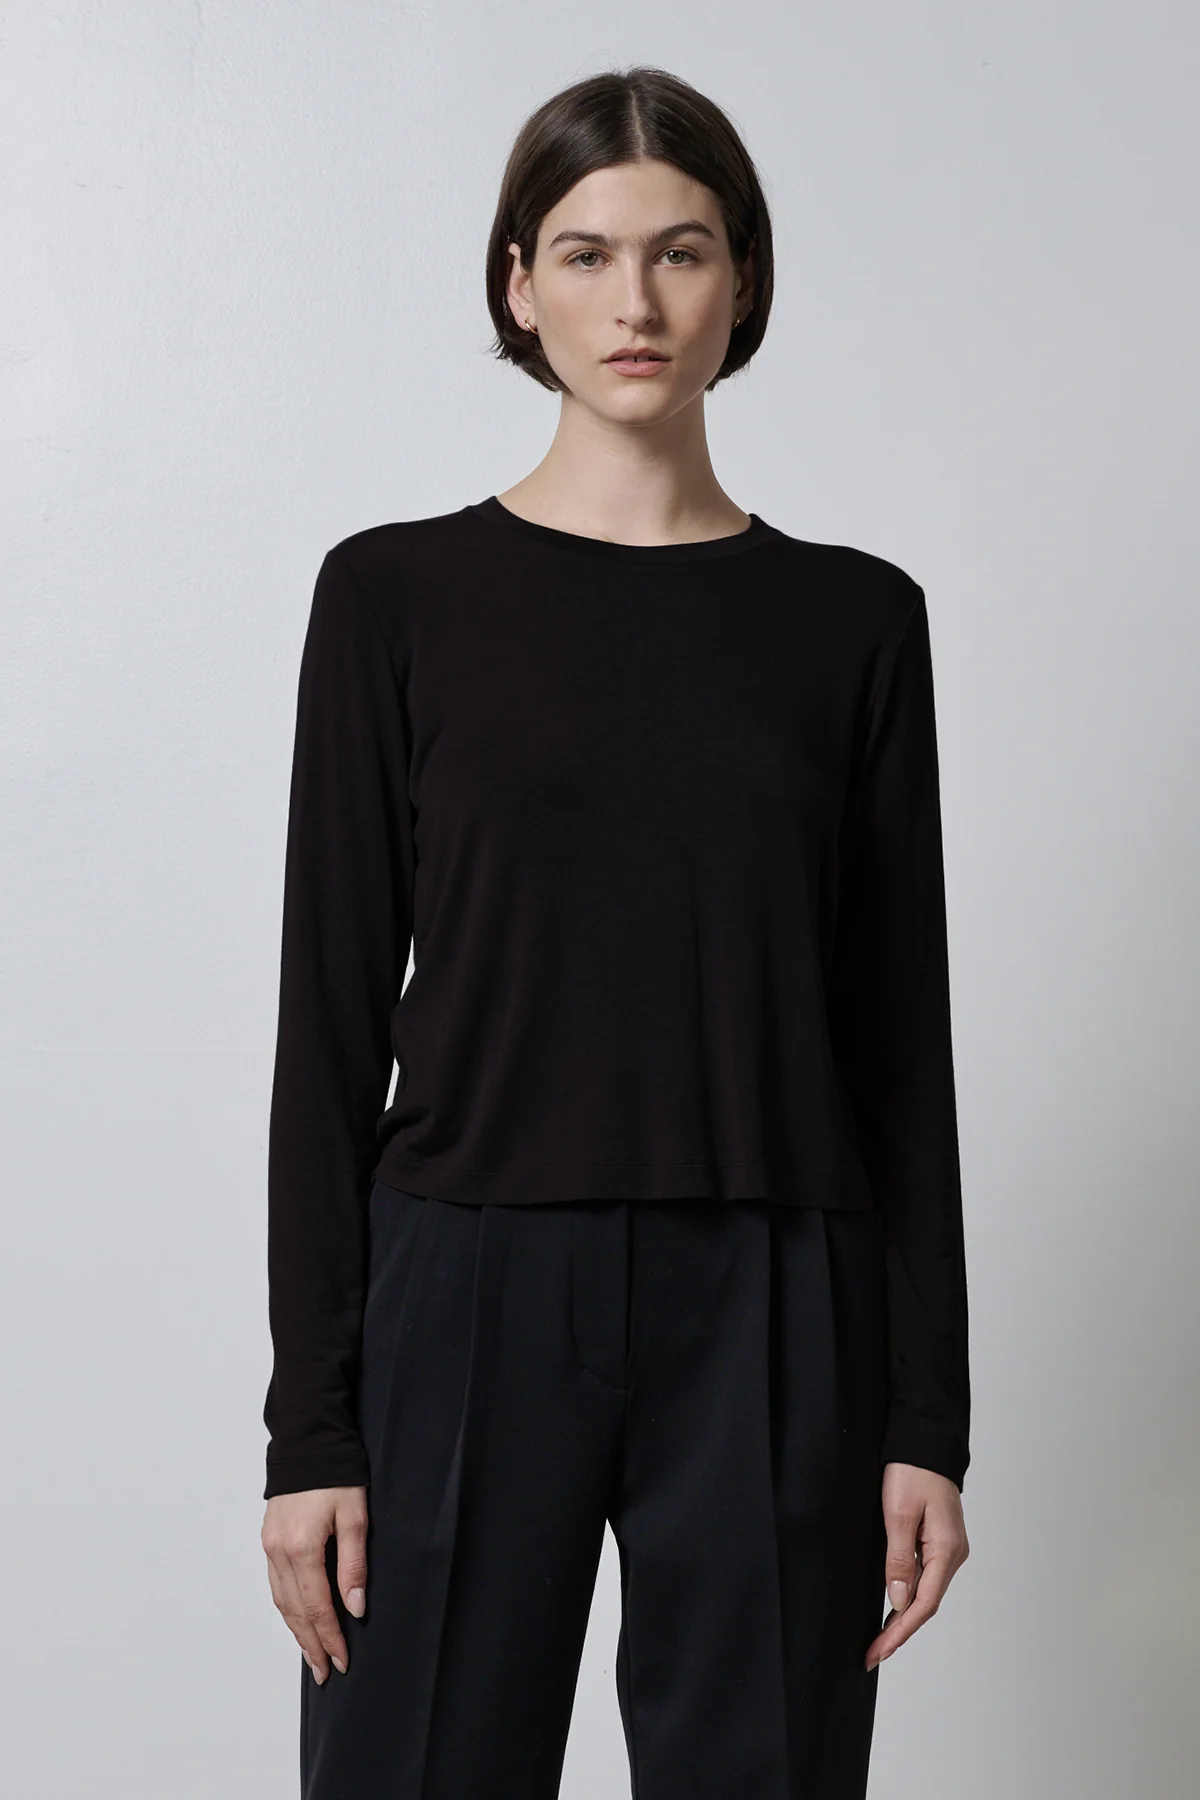 Velvet by Jenny Graham Pacifica Modal Tee - Black Clothing - Tops - Shirts - LS Knits by Velvet | Grace the Boutique